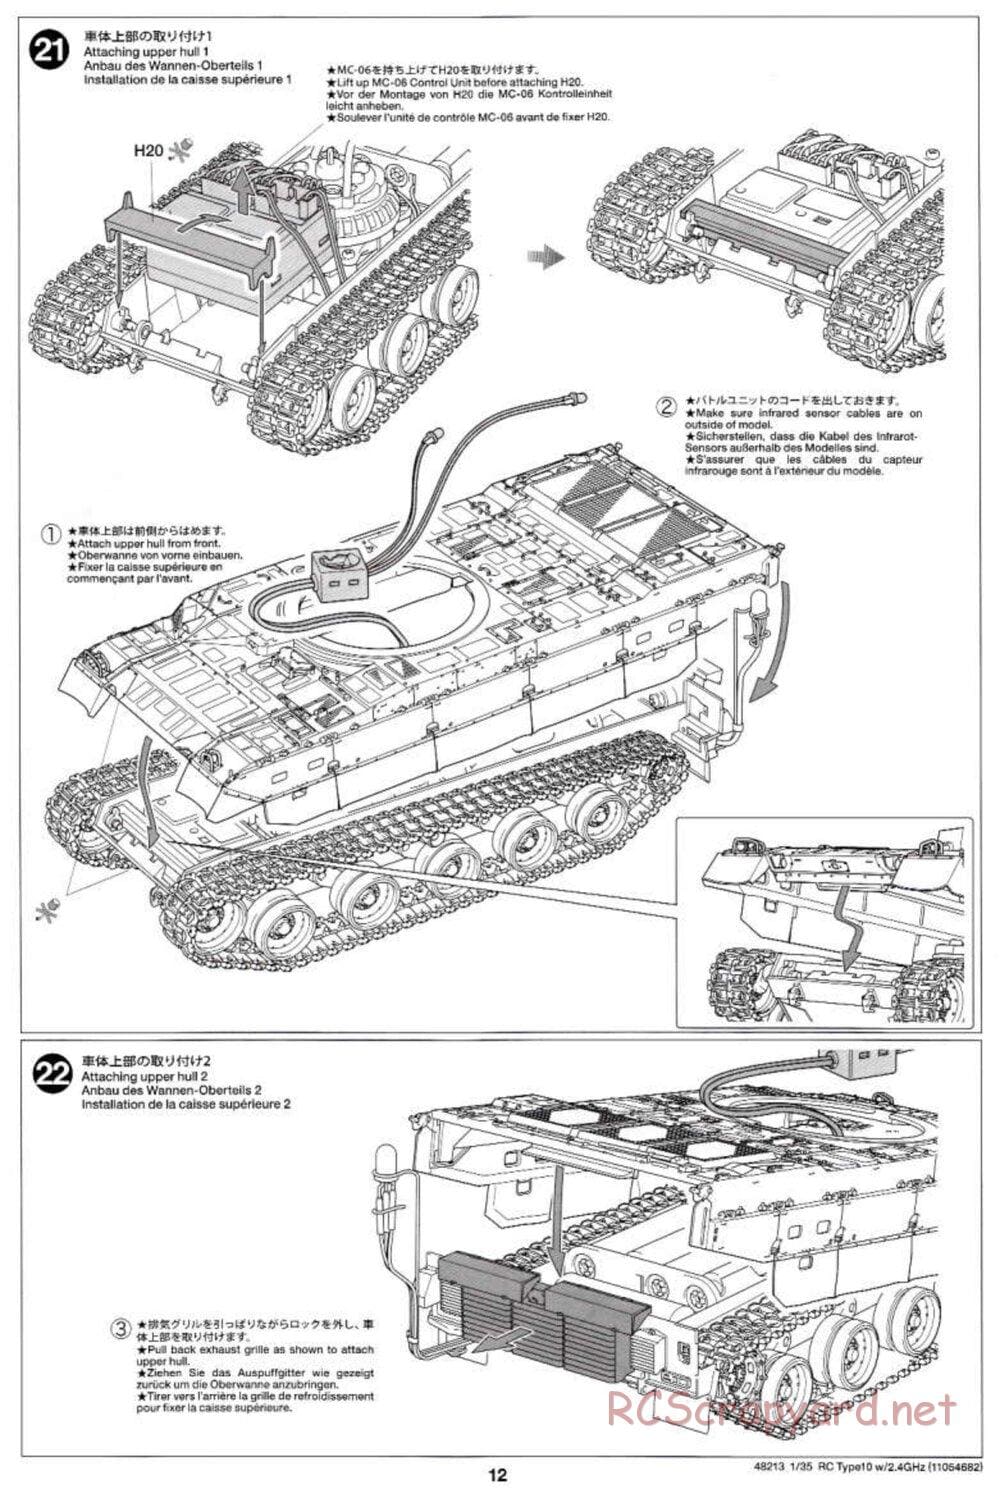 Tamiya - JGSDF Type 10 Tank - 1/35 Scale Chassis - Manual - Page 12